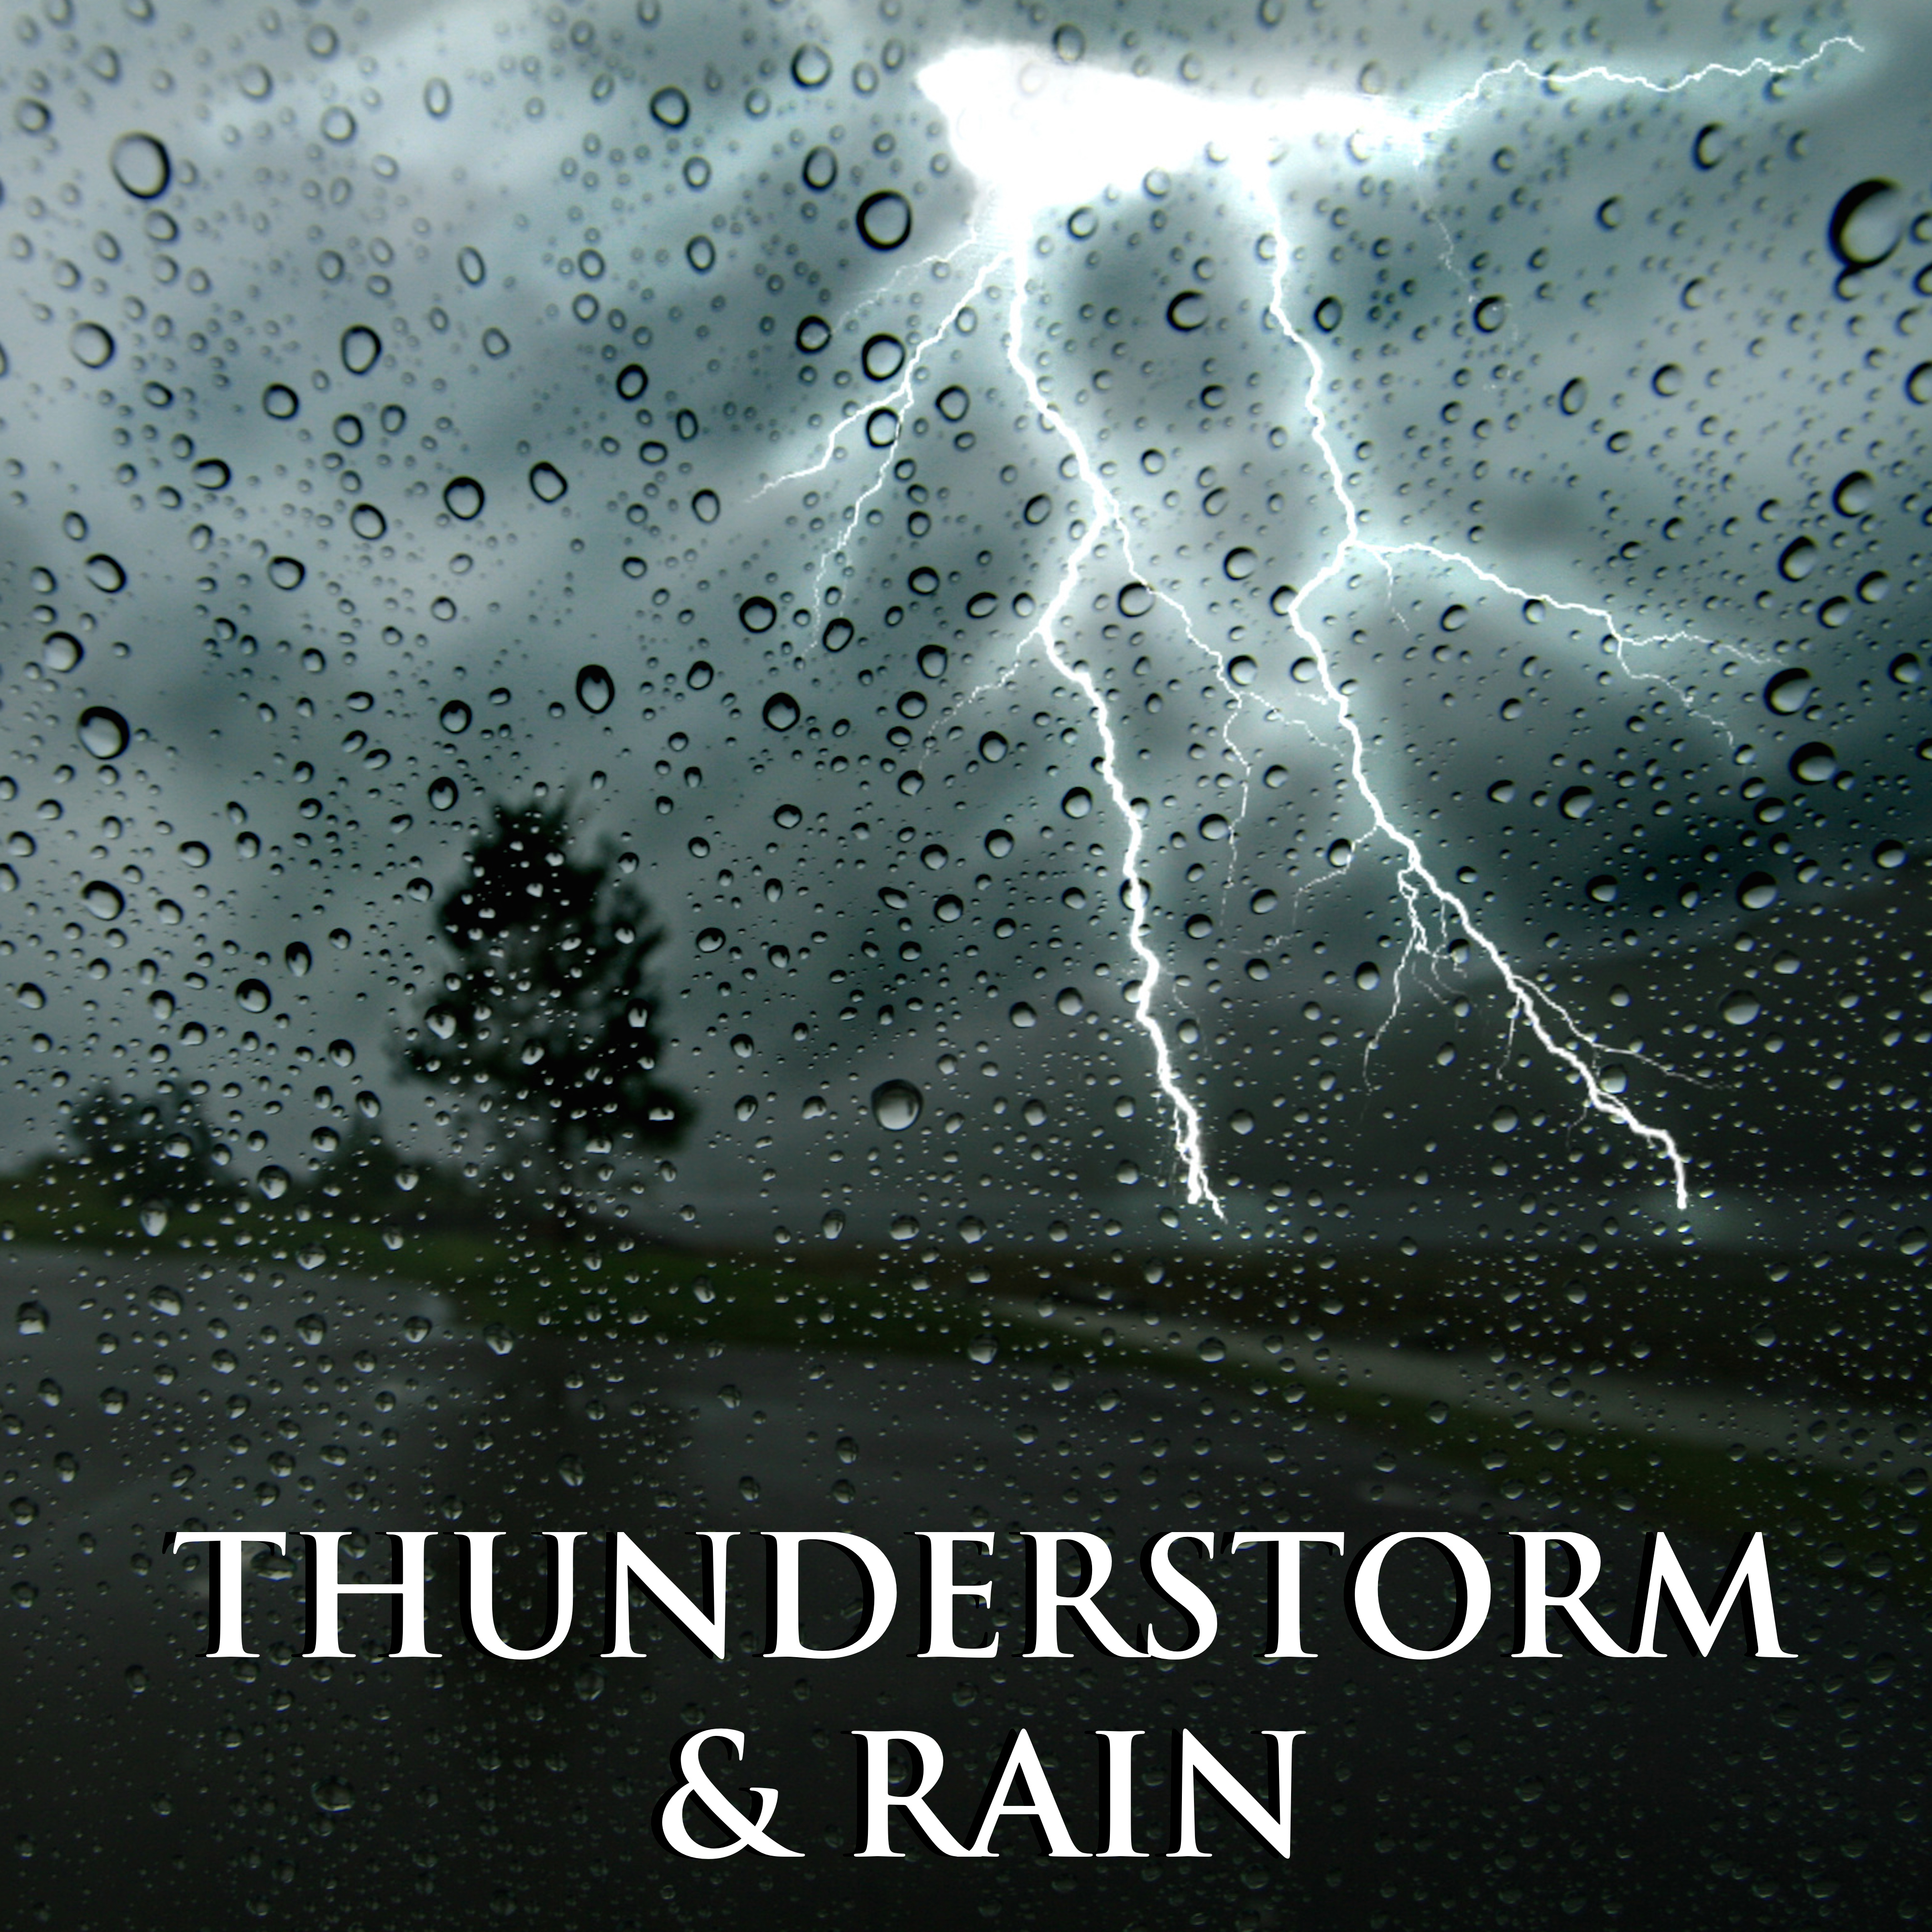 Thunderstorm & Rain - Deep Relaxation Music with Nature Sounds Effects of Thunder and Rainfall